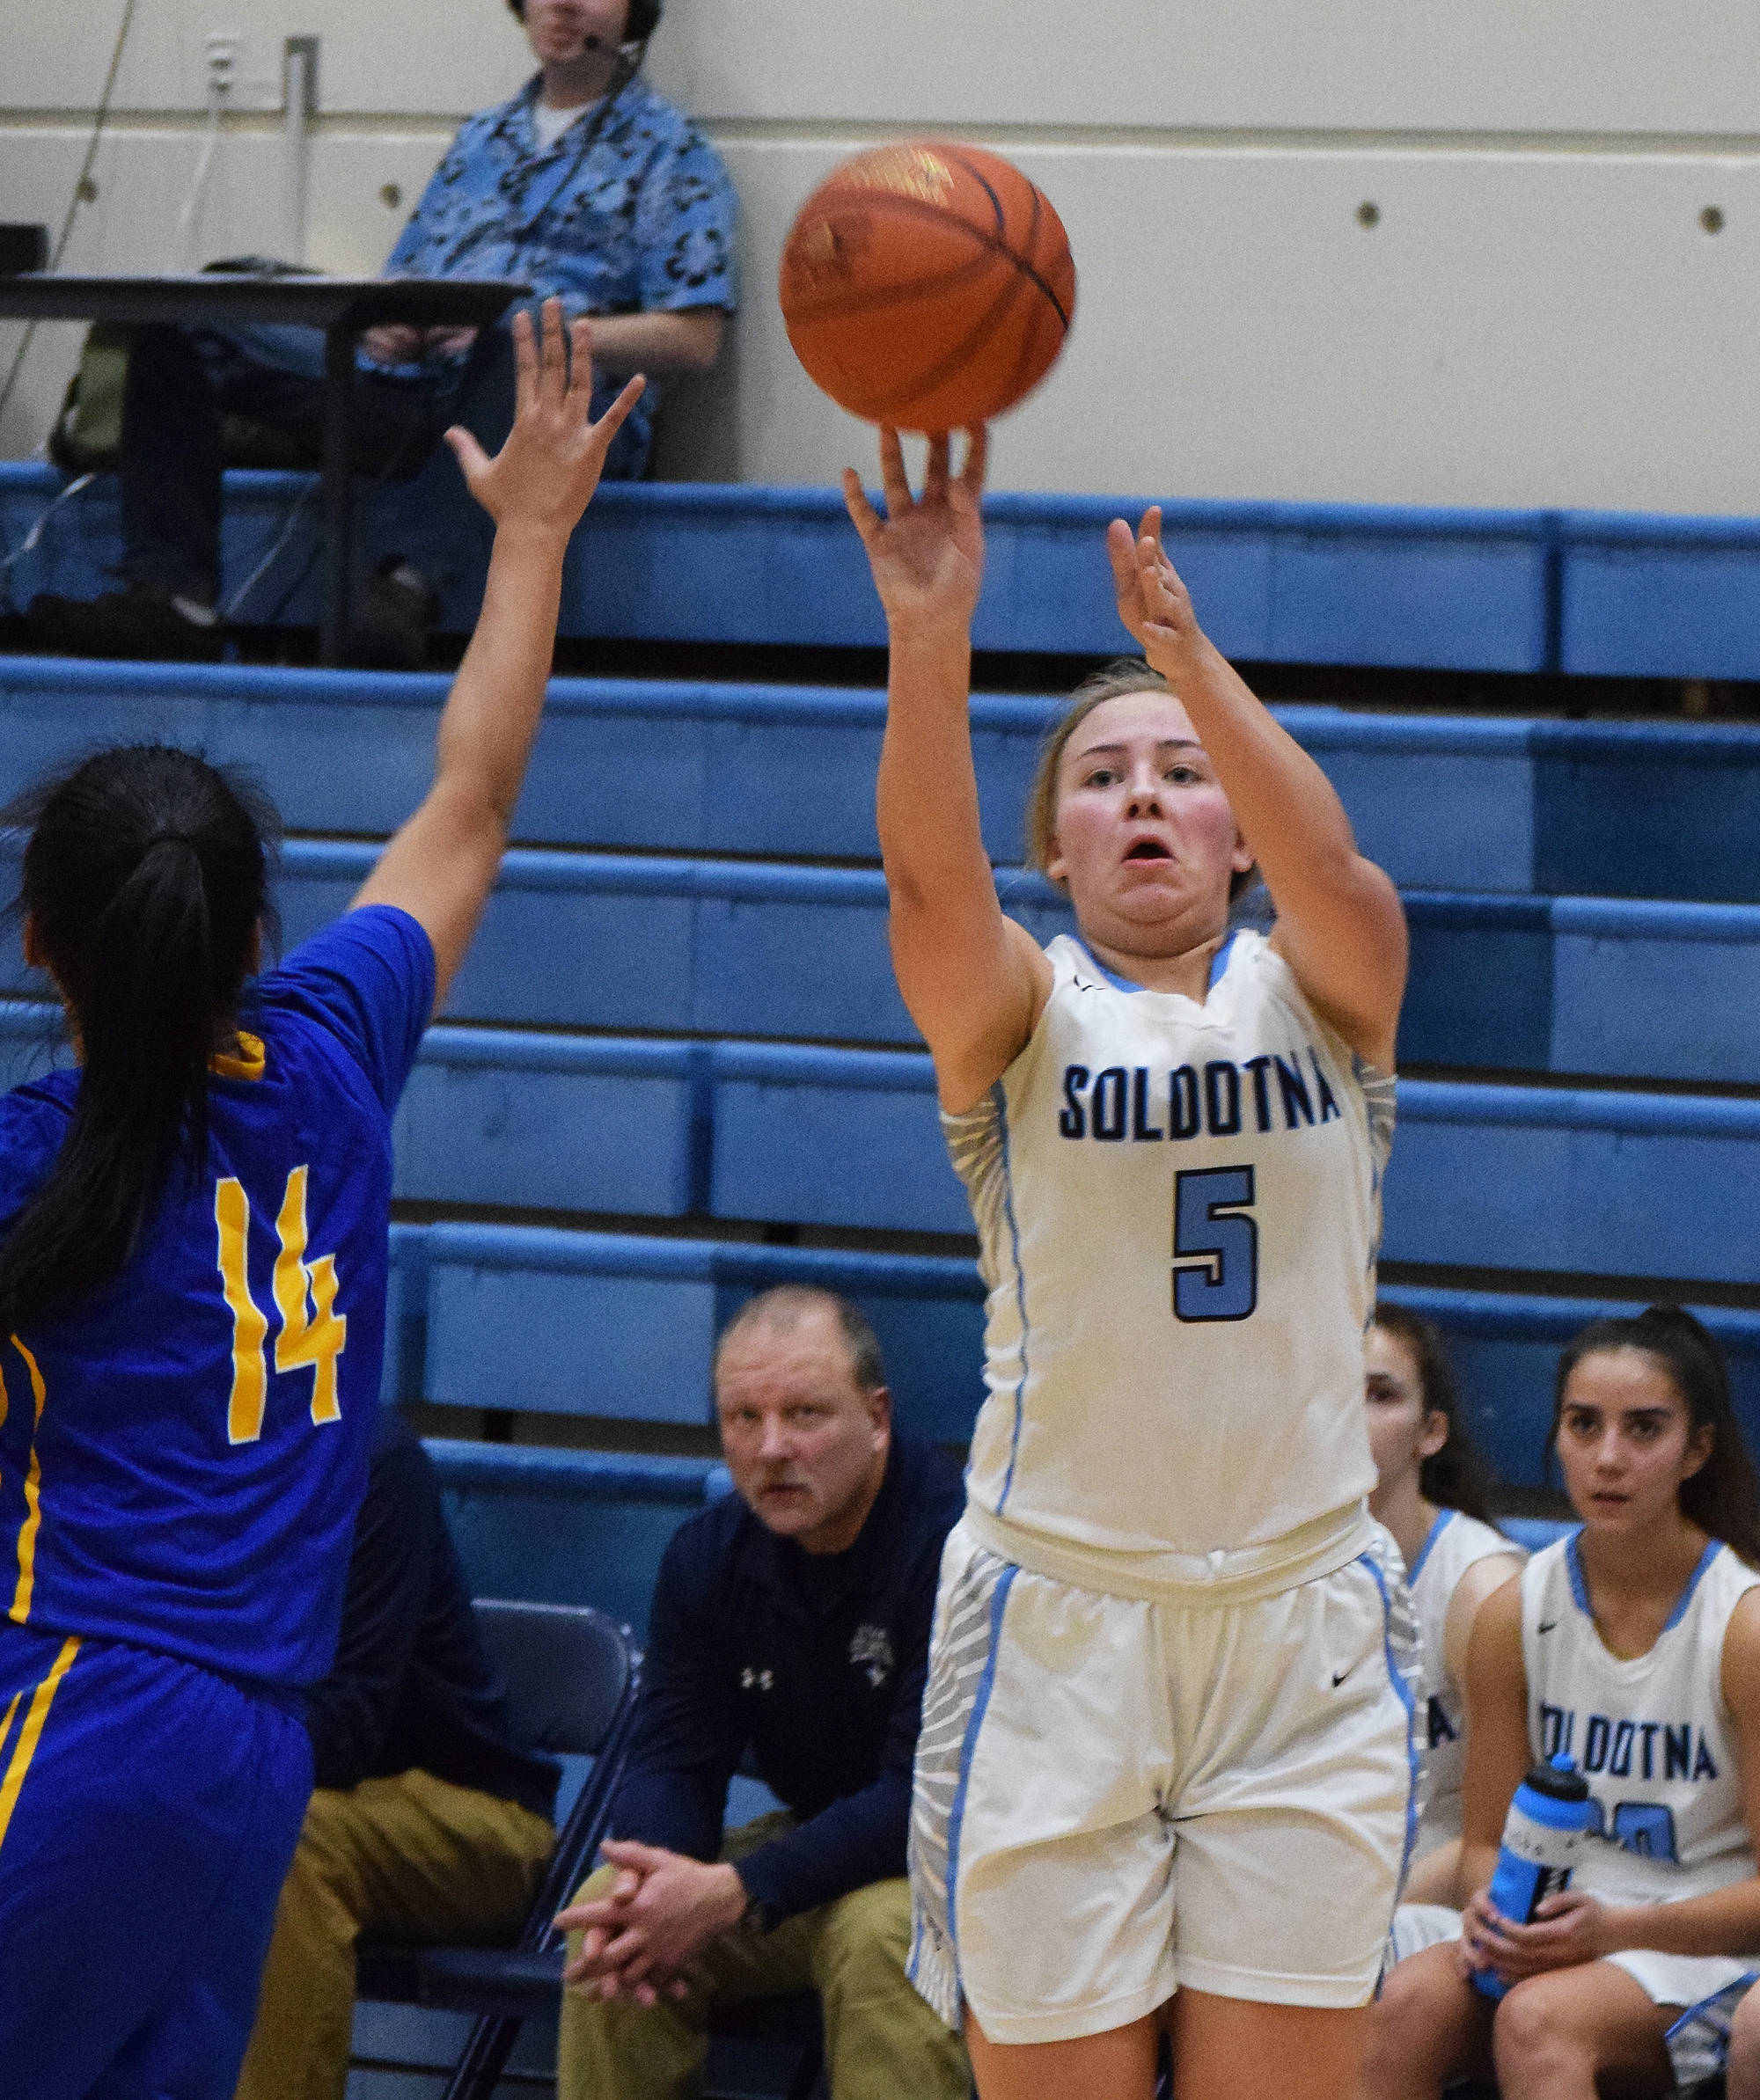 Soldotna’s Brittani Blossom launches a 3-point shot Friday night over Kodiak defender Lisa Marcelo at the Powerade/Al Howard Tip-Off tournament at Soldotna. (Photo by Joey Klecka/Peninsula Clarion)